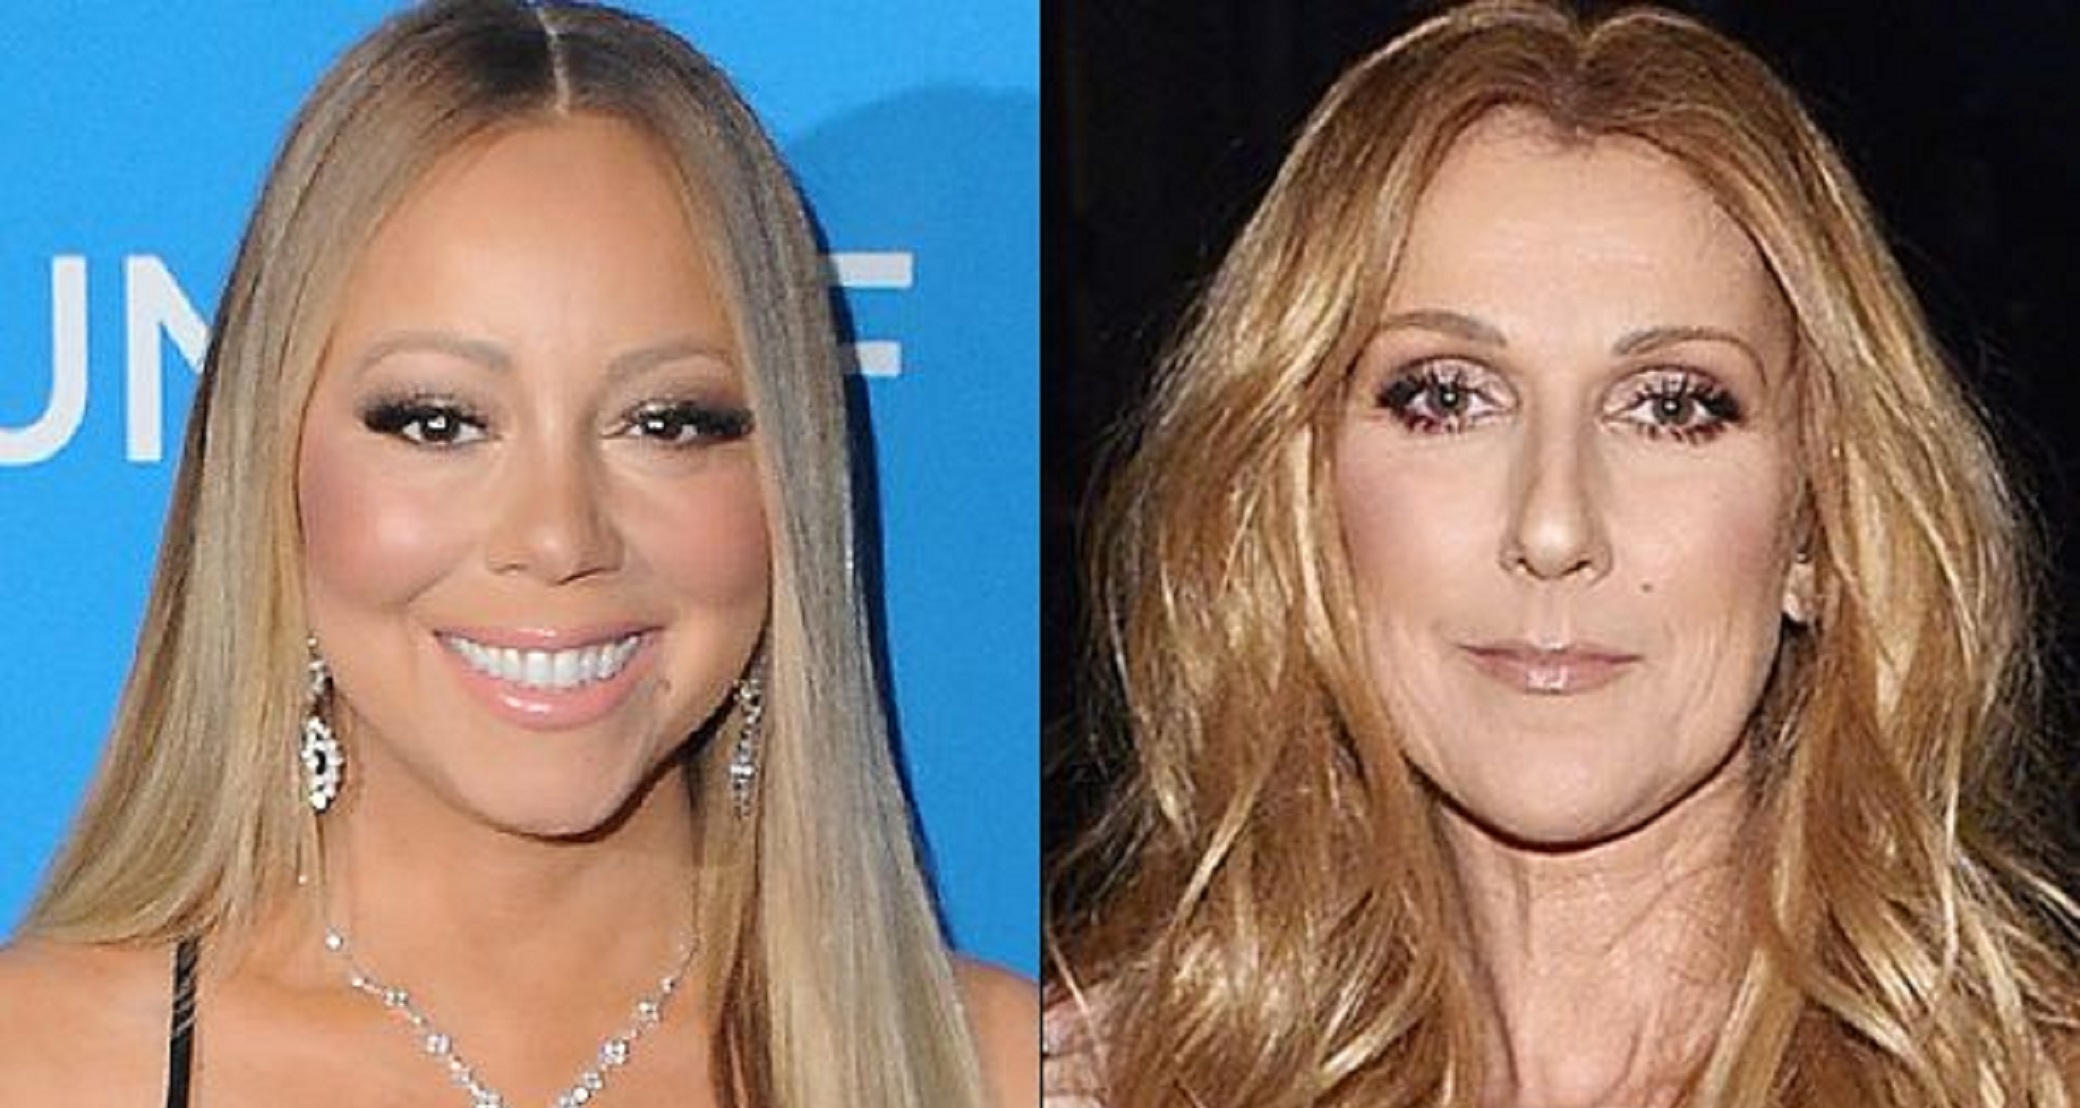 Mariah Carey Or Celine Dion – Who’s The Better Singer? Vote Here!